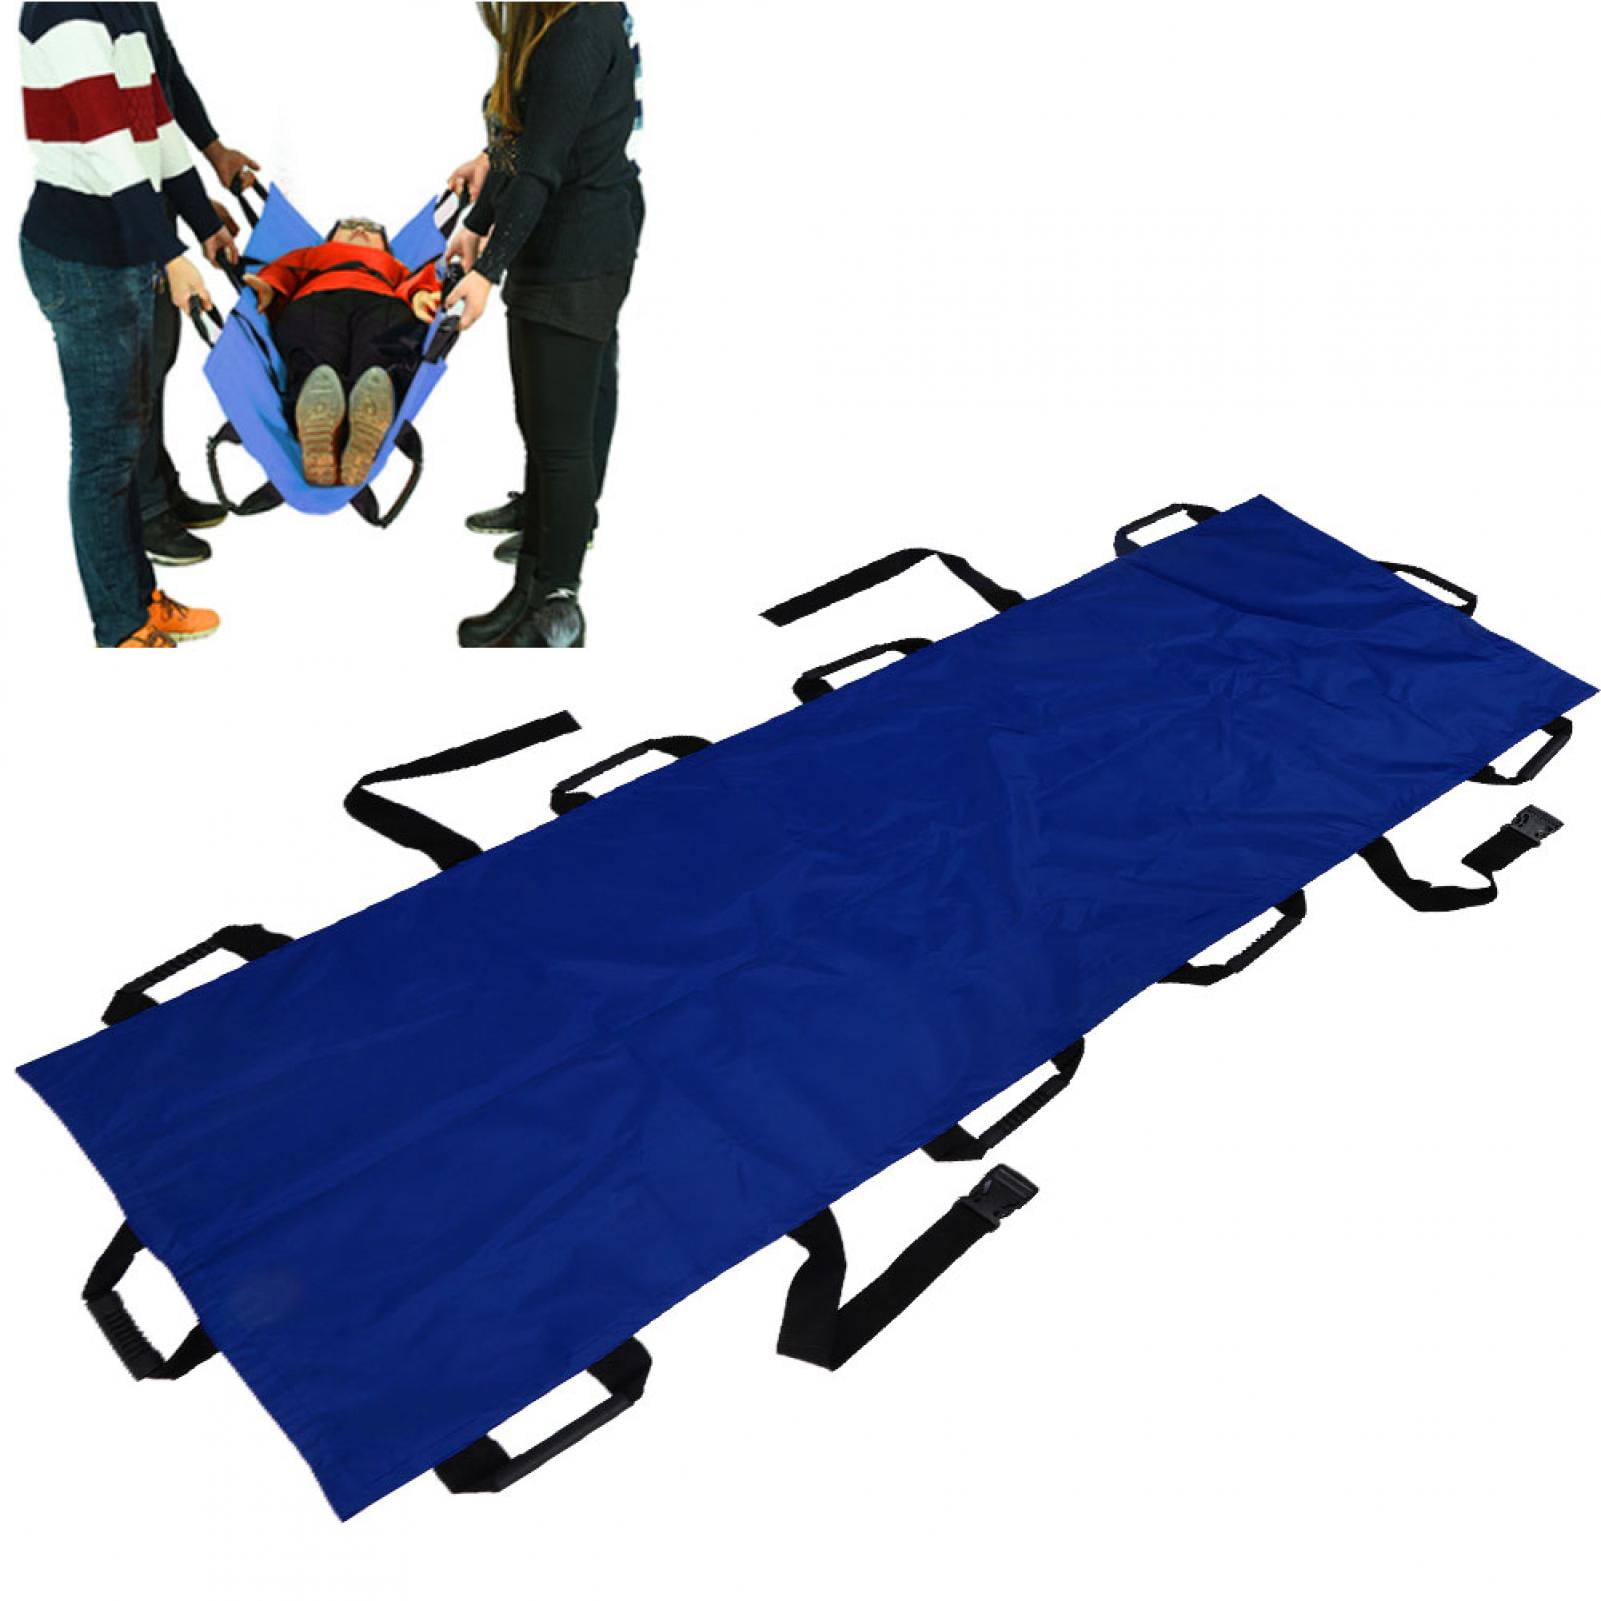 Sports Venues Portable Transport Unit -Roll Stretcher EMS Foldable Patient Mover Rescue Roll Stretcher Sheet Home for Hospital with 12 Handles & Handbag Home First Aid Kit 